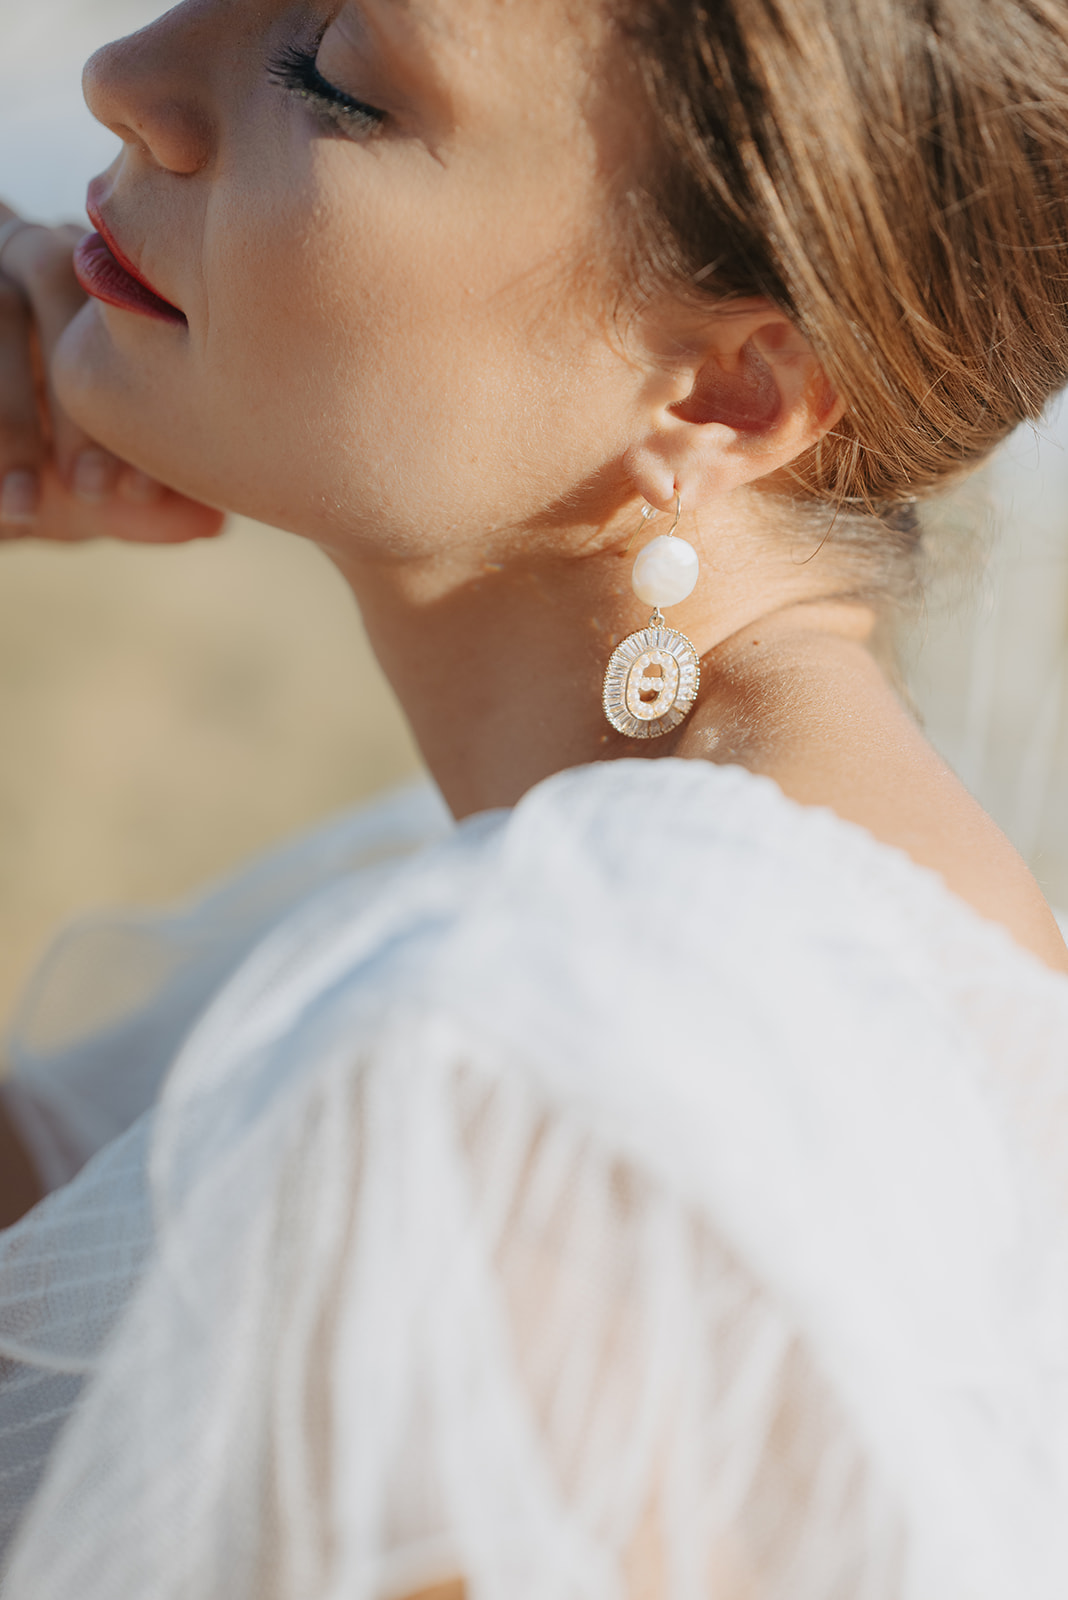 Bridal ideas, wedding earrings with pearls and gold